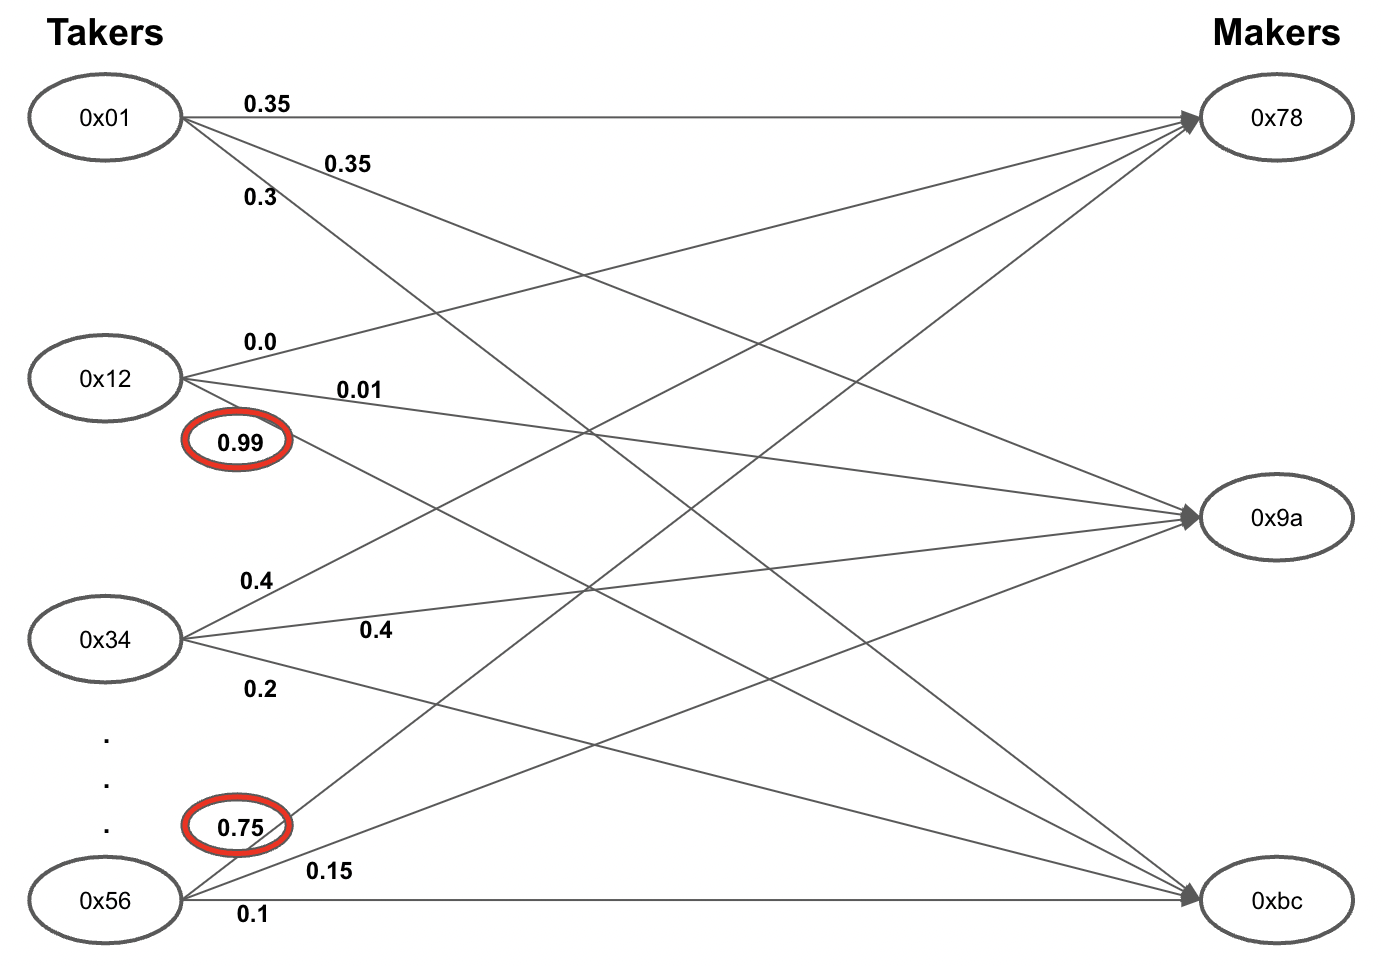 A maker-taker bipartite graph where edge weights indicate the proportion of a taker's volume that went to that maker. We could compute metrics such as skewness/kurtosis on these edge distributions to place a confidence on suspiciously interconnected subgraphs.